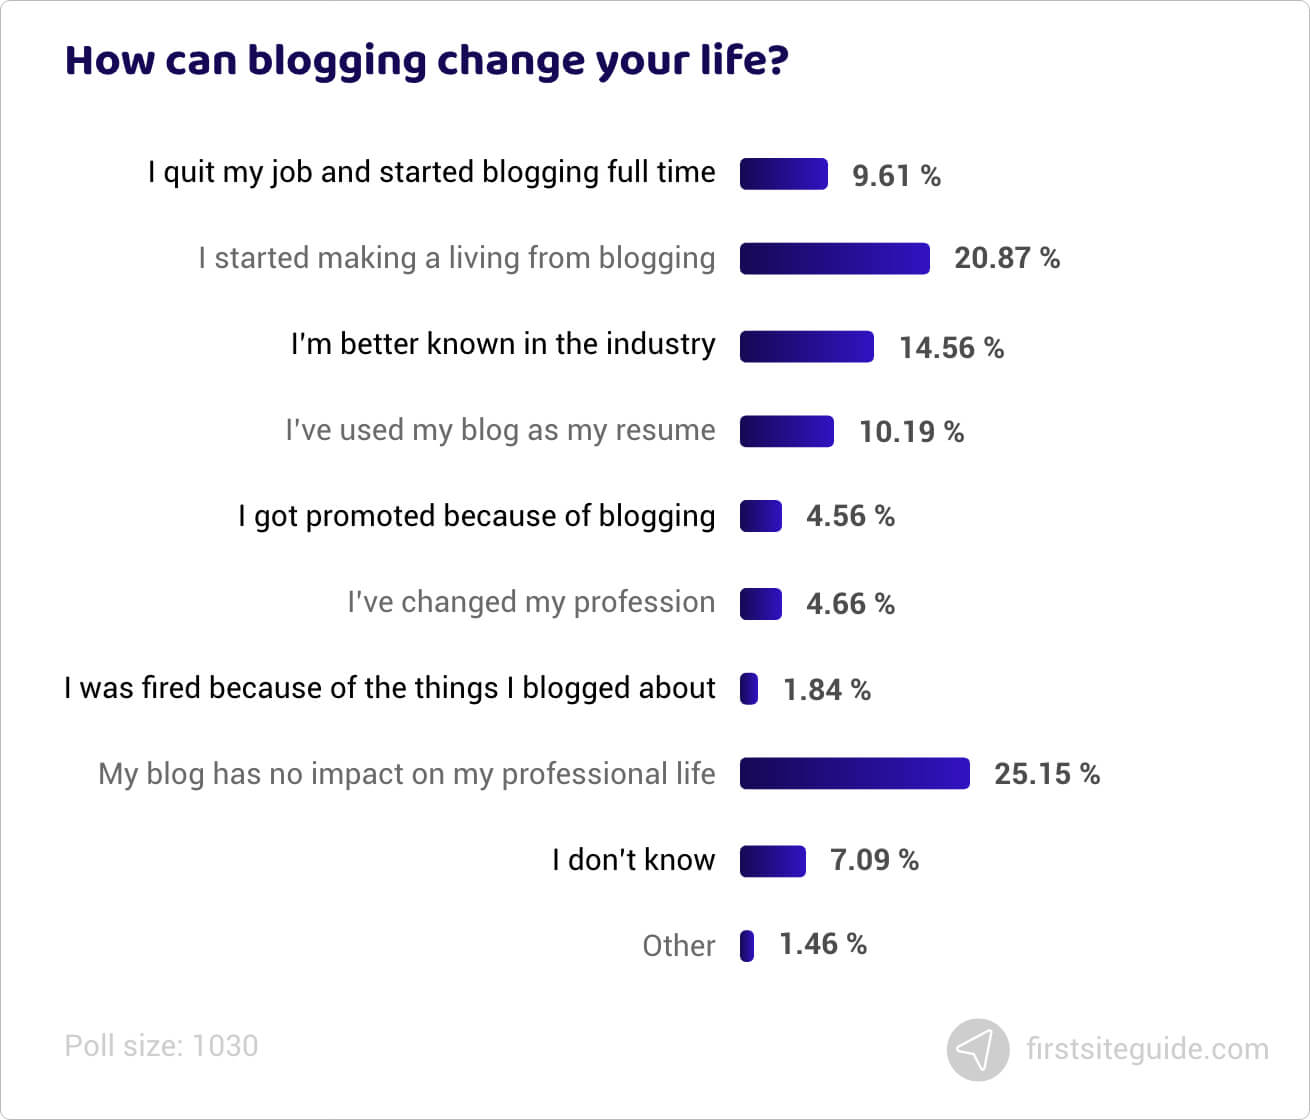 How can blogging change your life